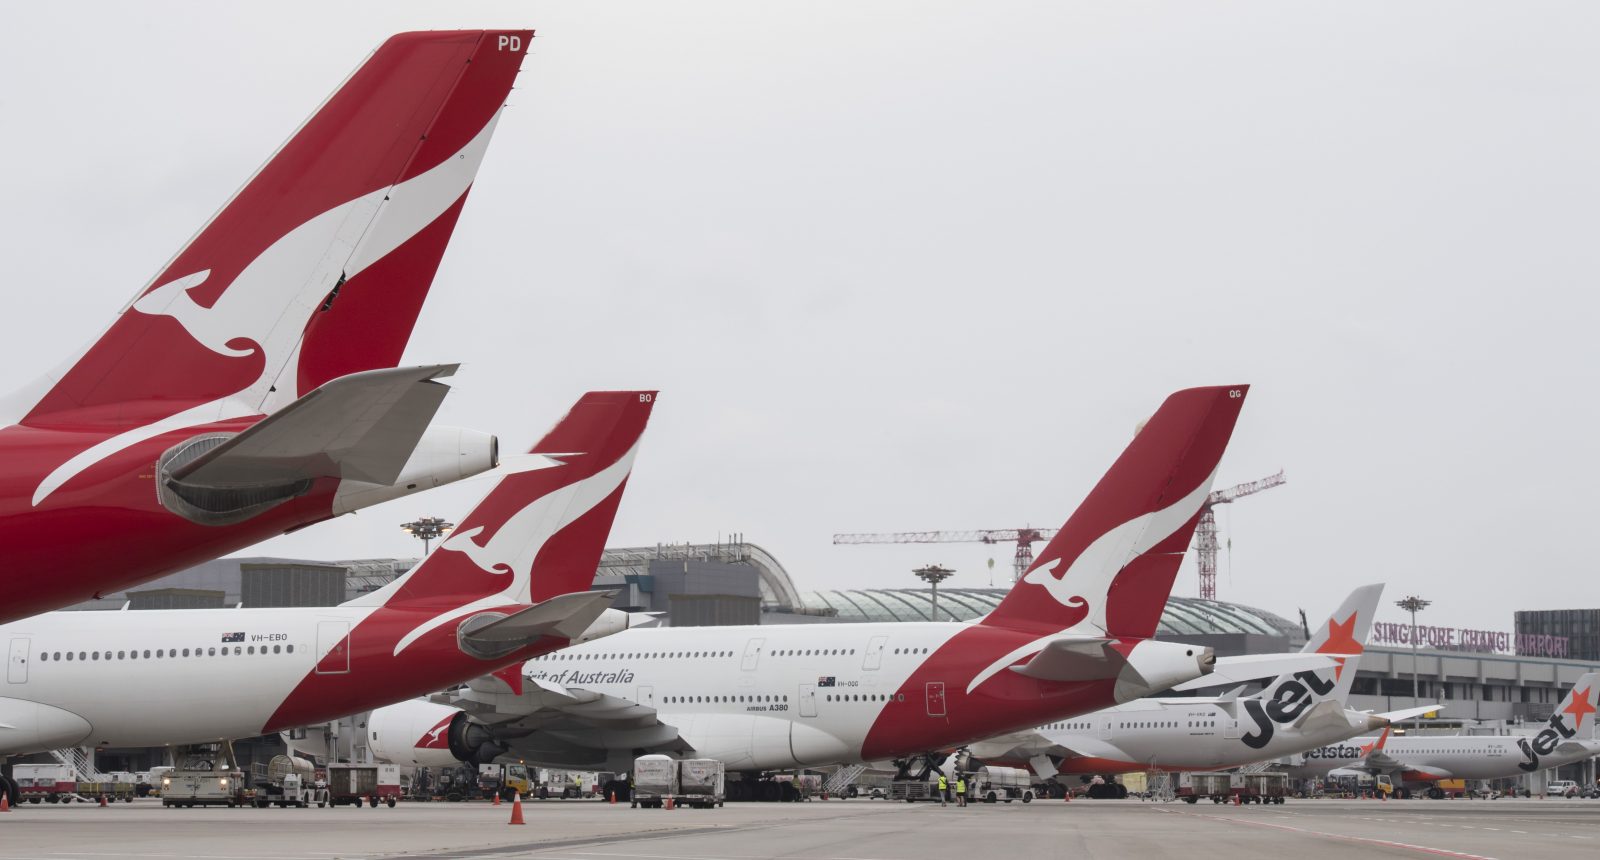 Qantas CEO Says Rising Oil Prices Aren't Affecting Success: Passengers Willing to Pay Premium for Ultra-Long-Haul Flights